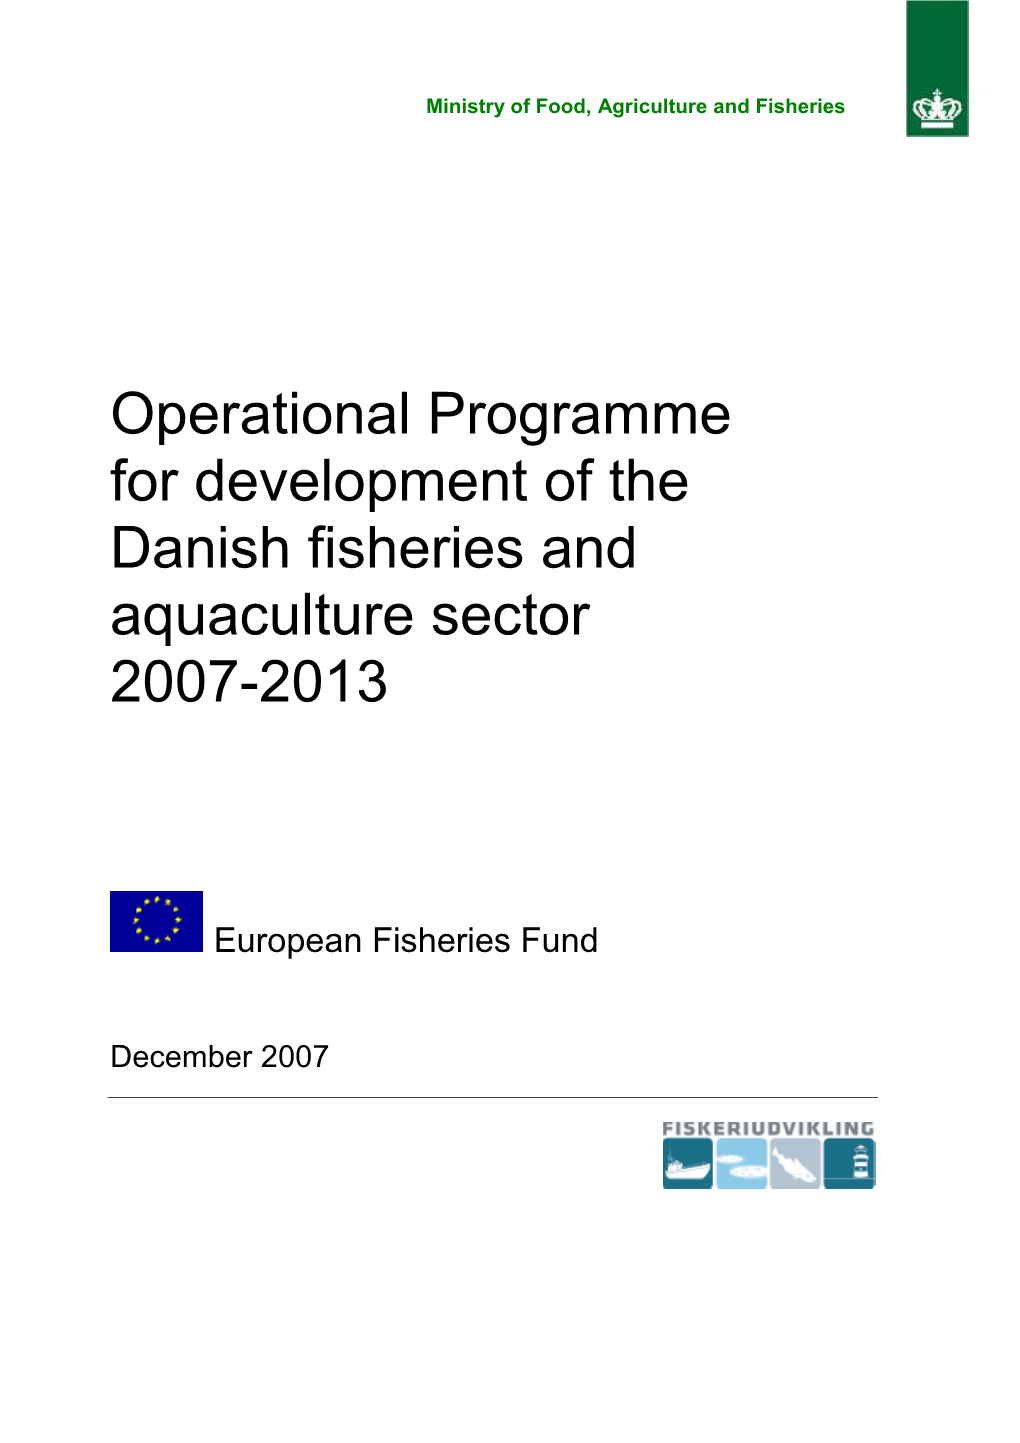 Operational Programme for Development of the Danish Fisheries and Aquacul- Ture Sector 2007-2013